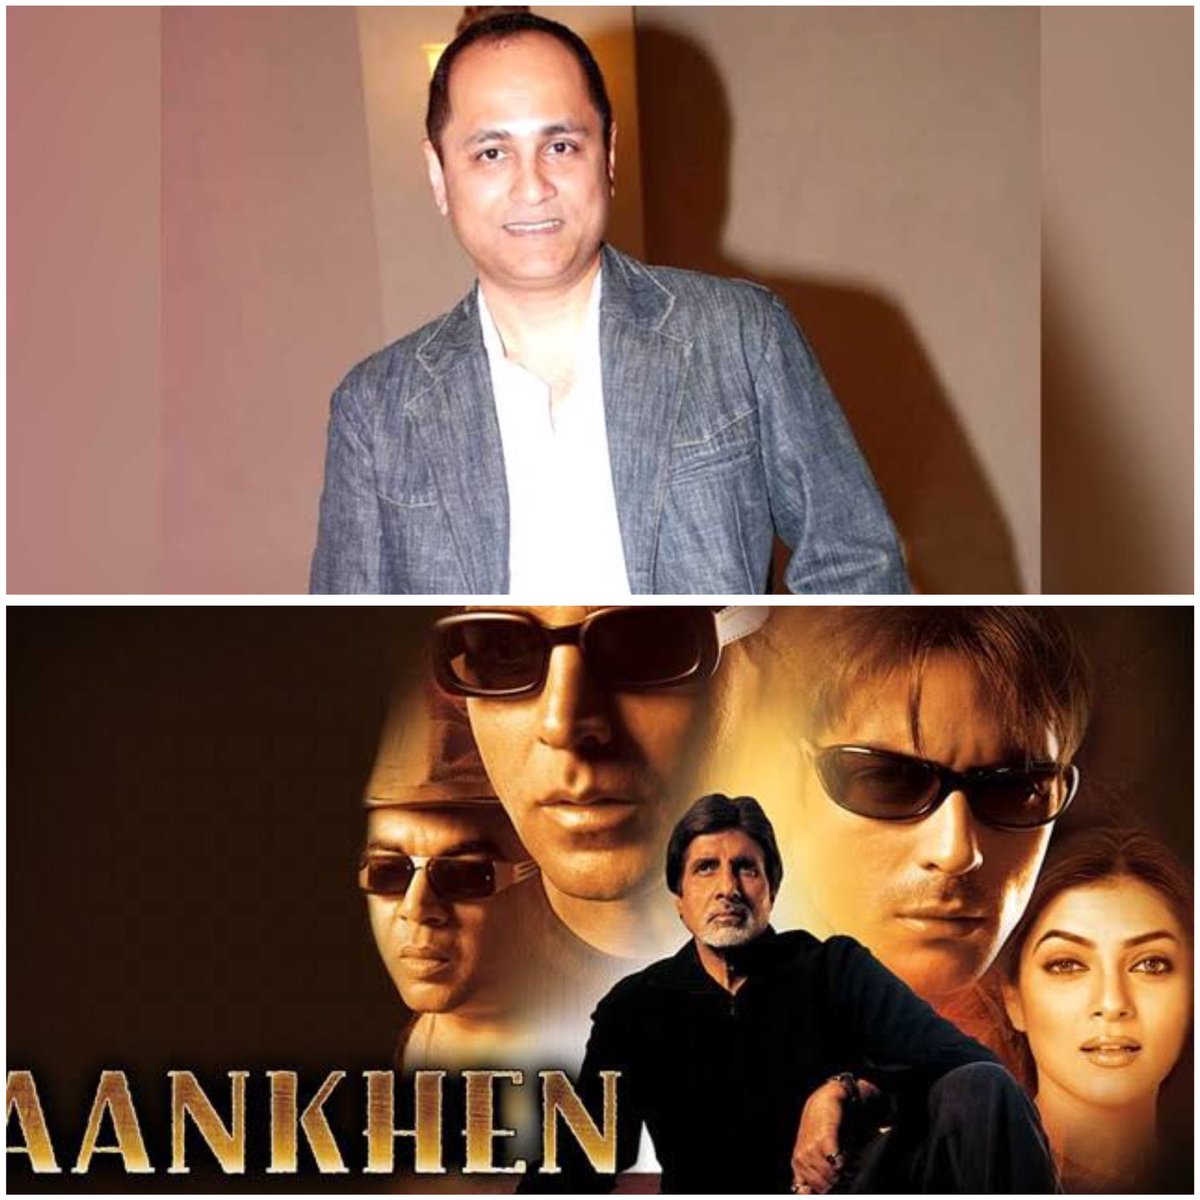 #Aankhen- A truly Masterpiece & It is among the finest heist thrillers of all time. The impact of this film is still solid👌🔥

Cheers to the director  #VipulAmrutlalShah and the stellar star-cast as the film completes 22 years. #22YearsOfAankhen